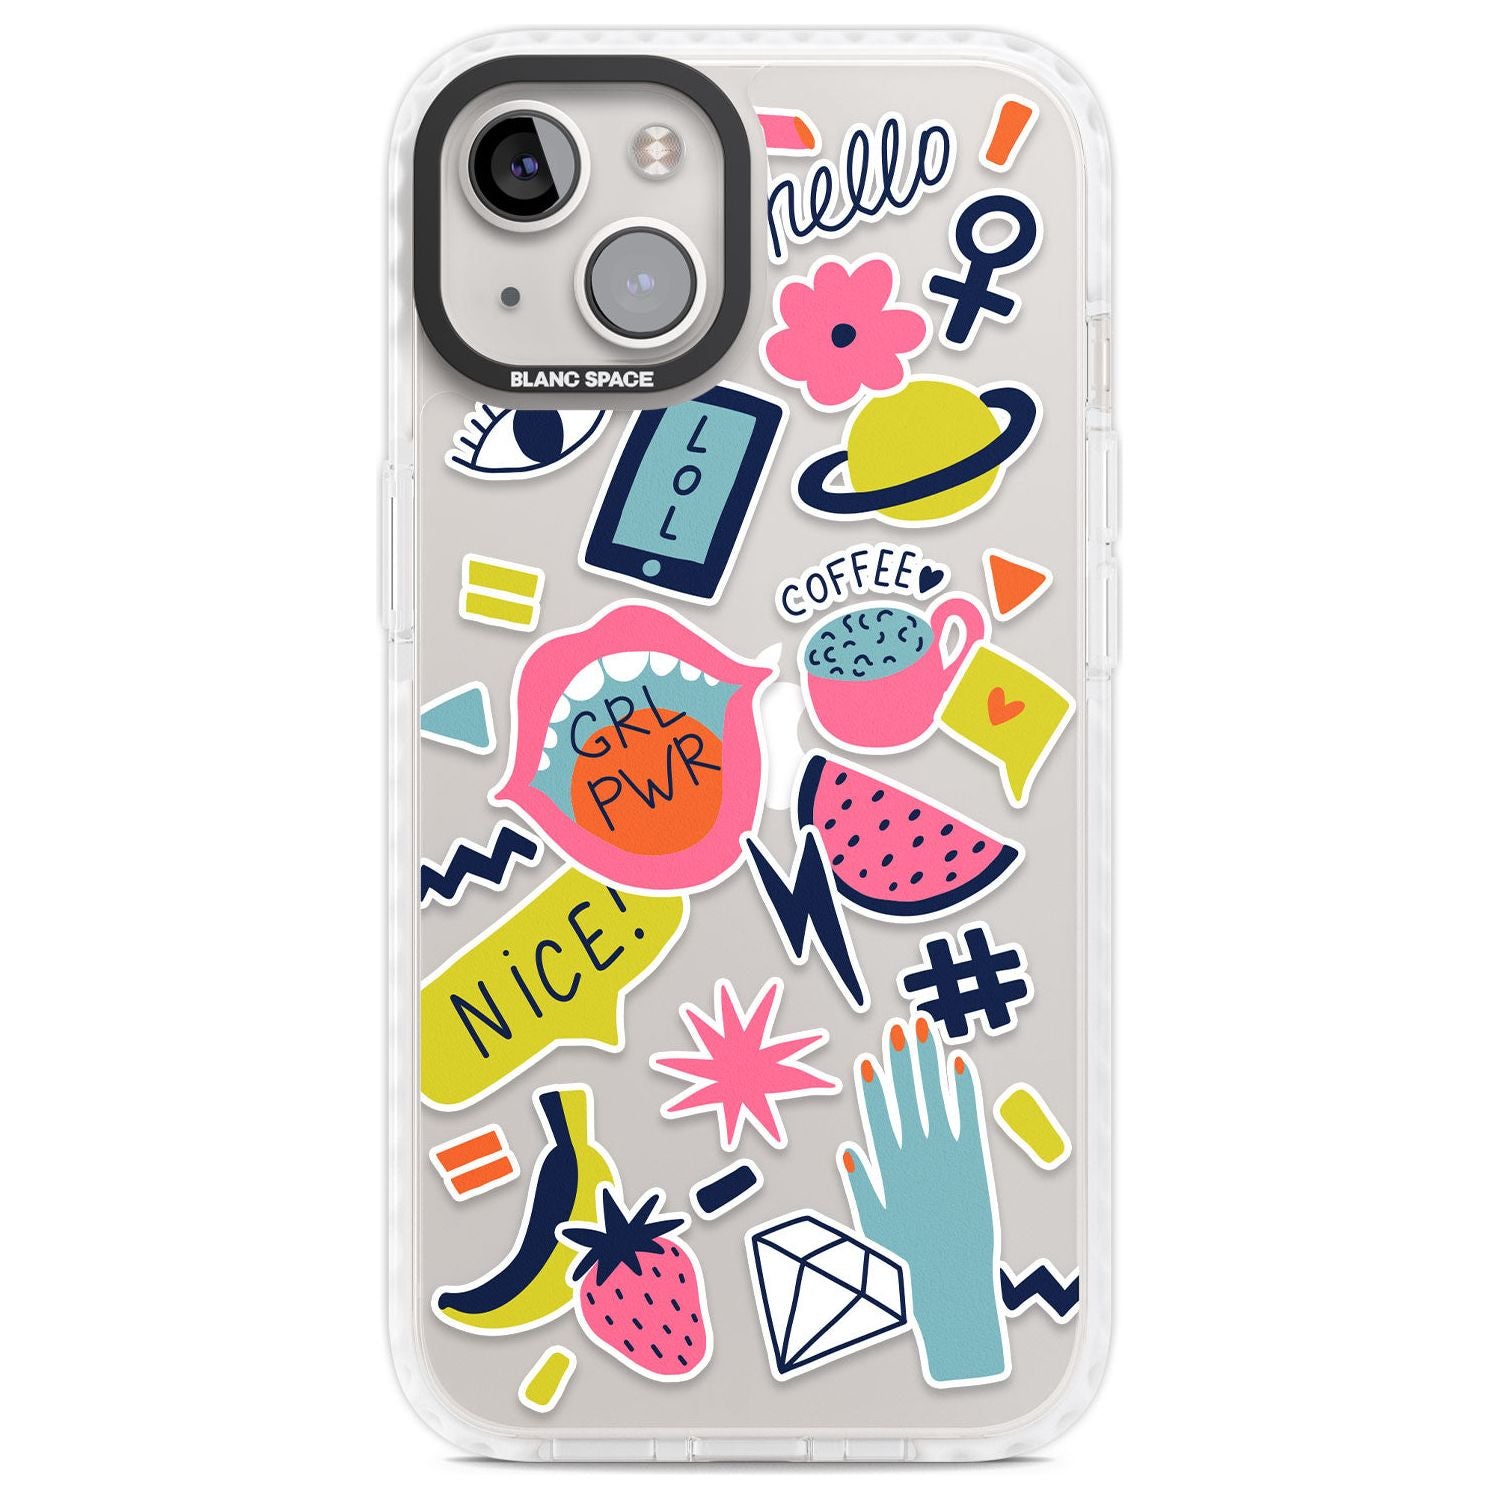 GRL PWR Phone Case iPhone 13 / Impact Case,iPhone 14 / Impact Case,iPhone 15 Plus / Impact Case,iPhone 15 / Impact Case Blanc Space